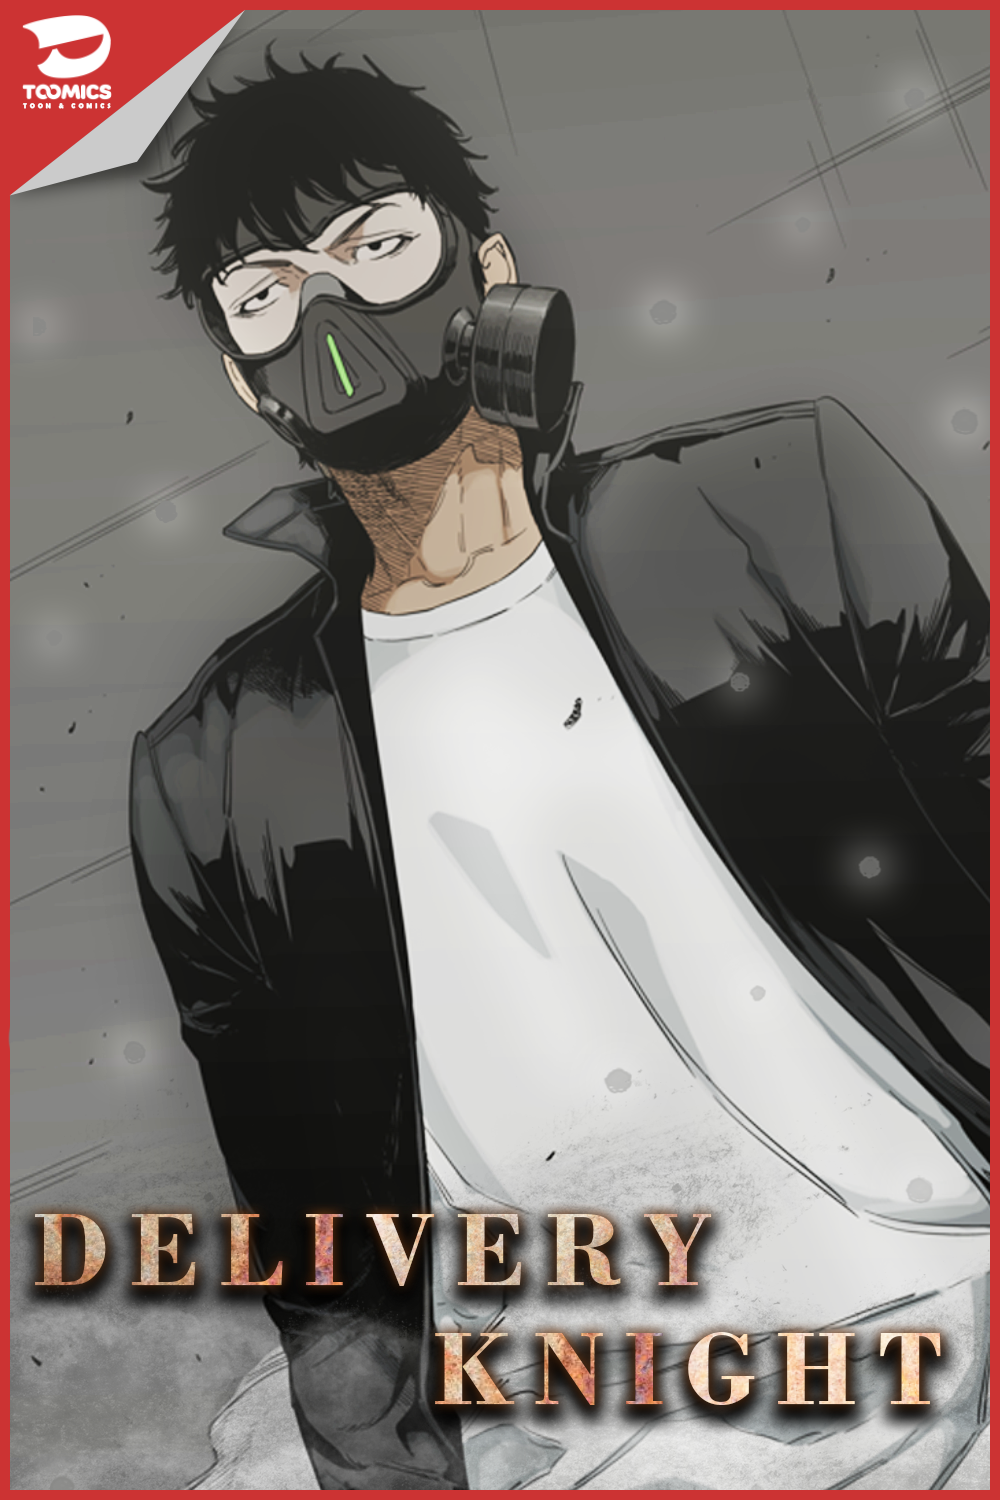 The Delivery Knight on the Delivery Knight Cover